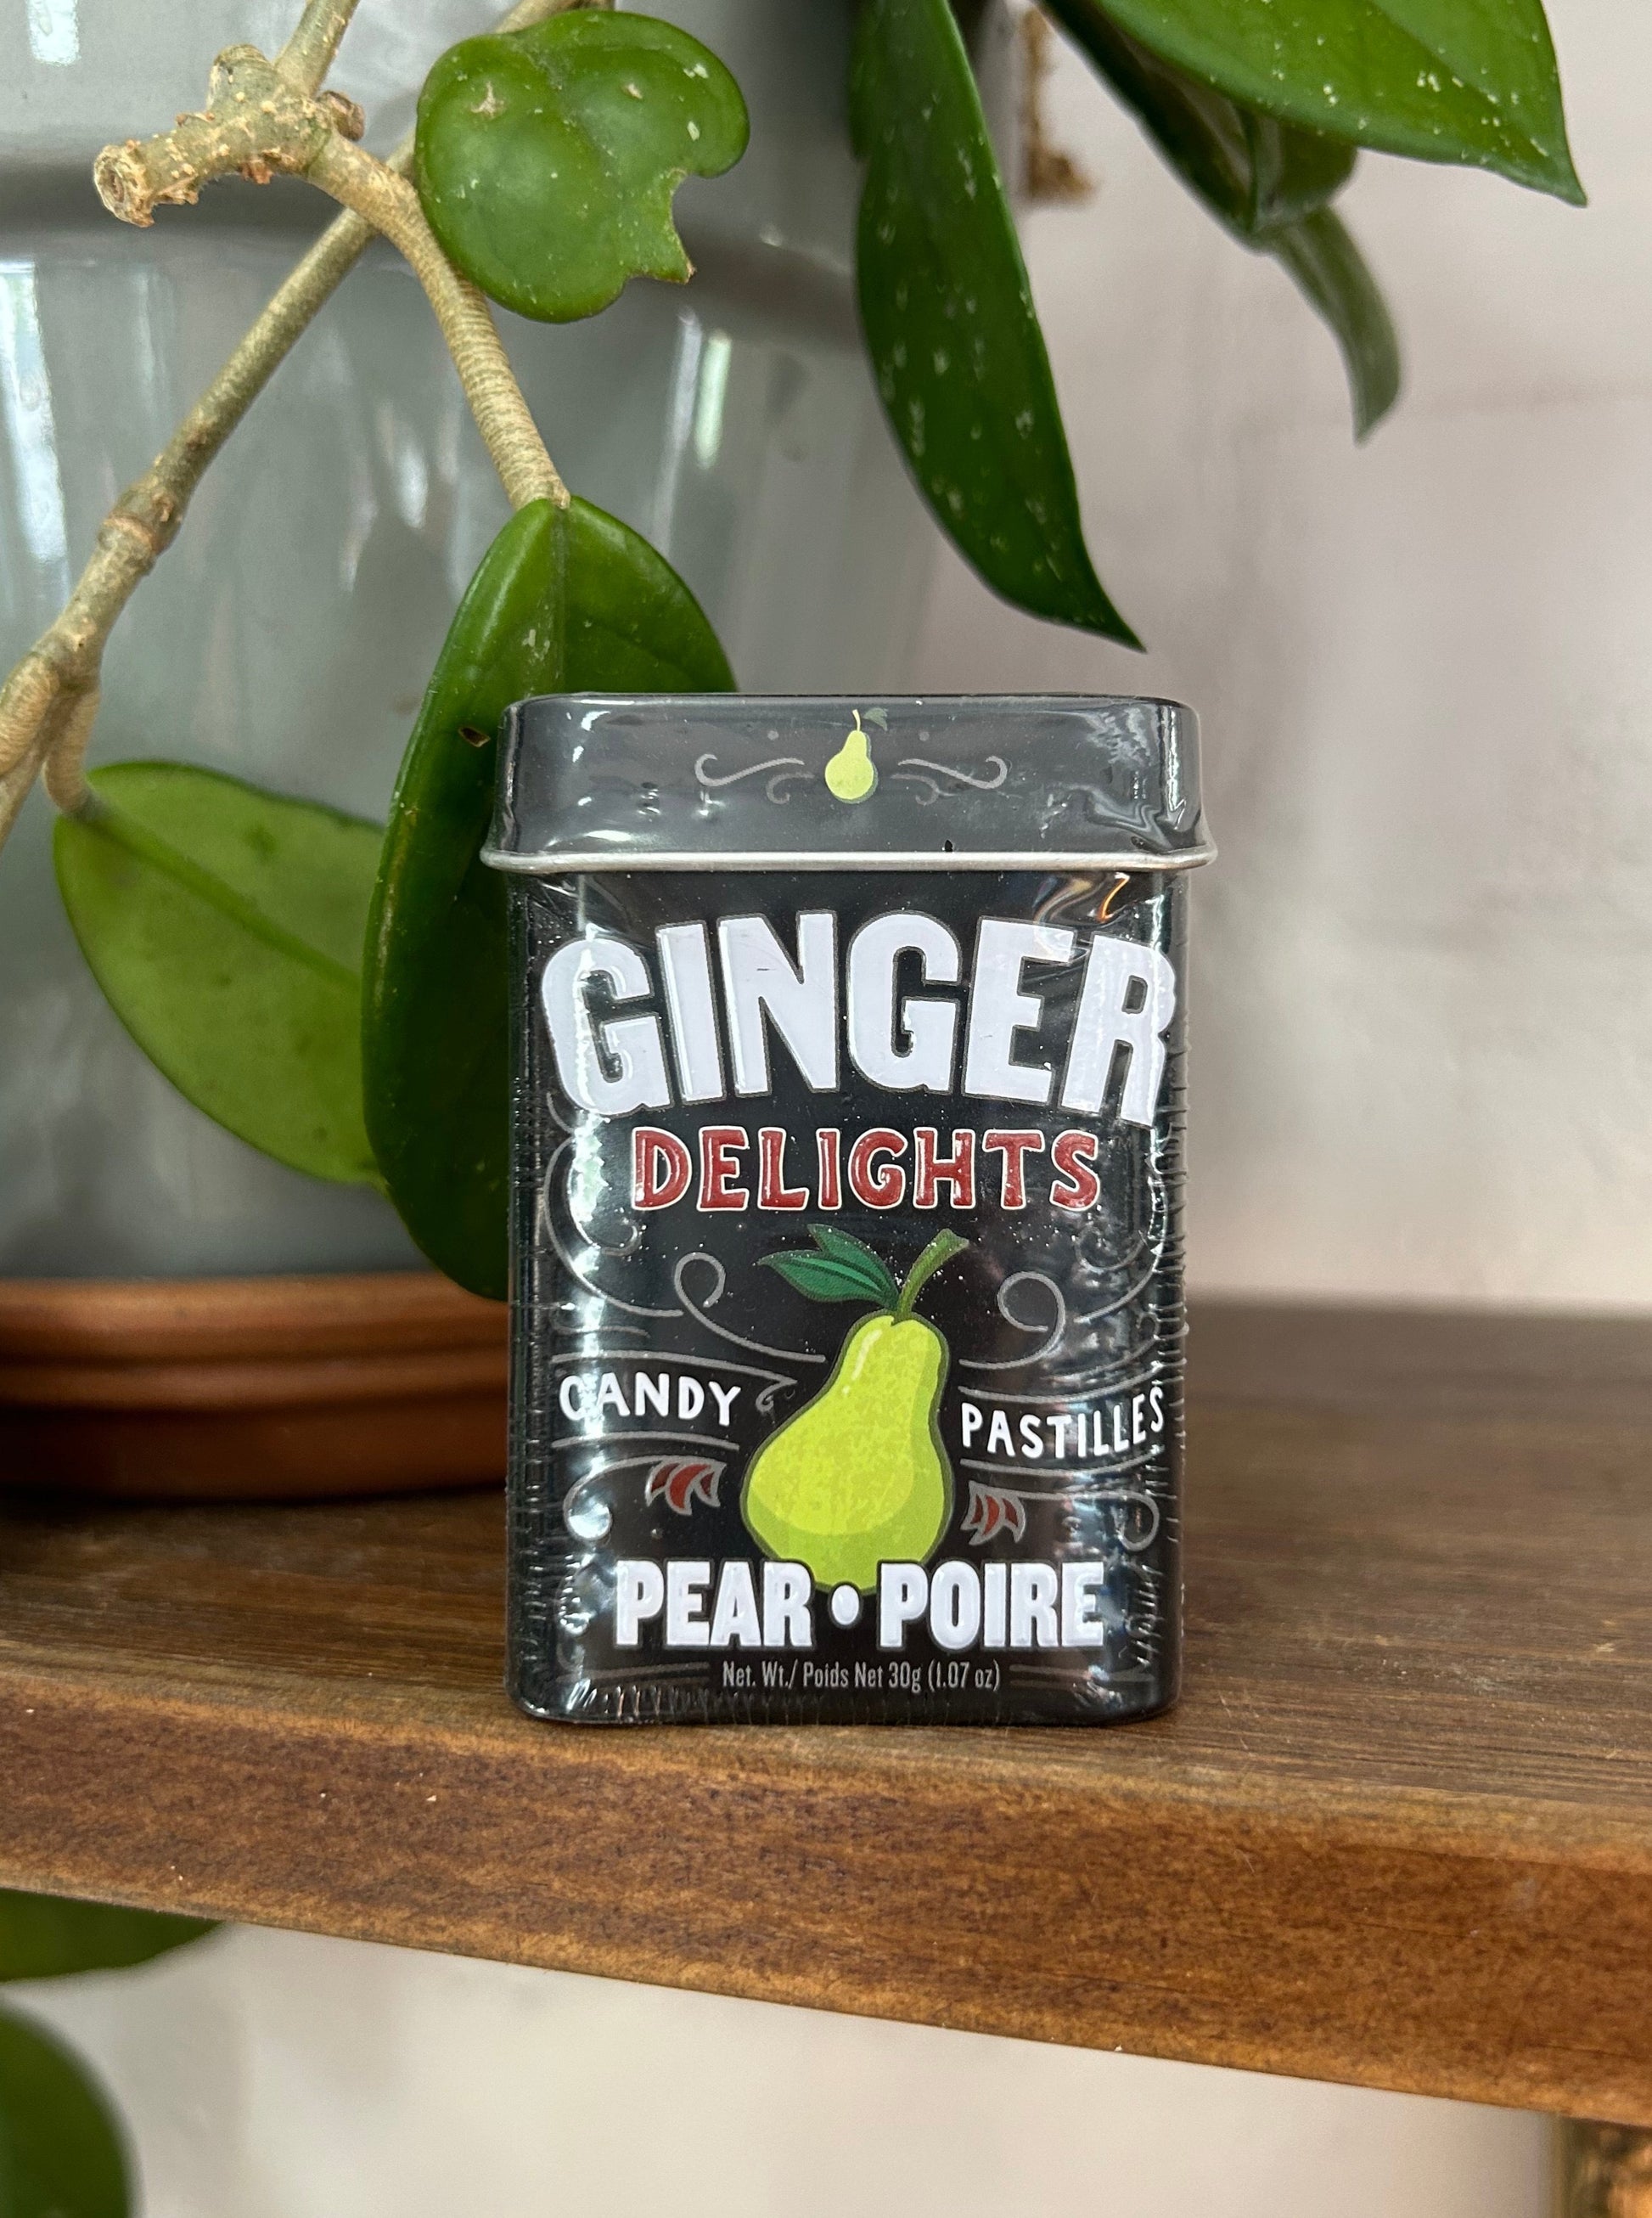 Pear ginger delights Each tin is 1.07 oz